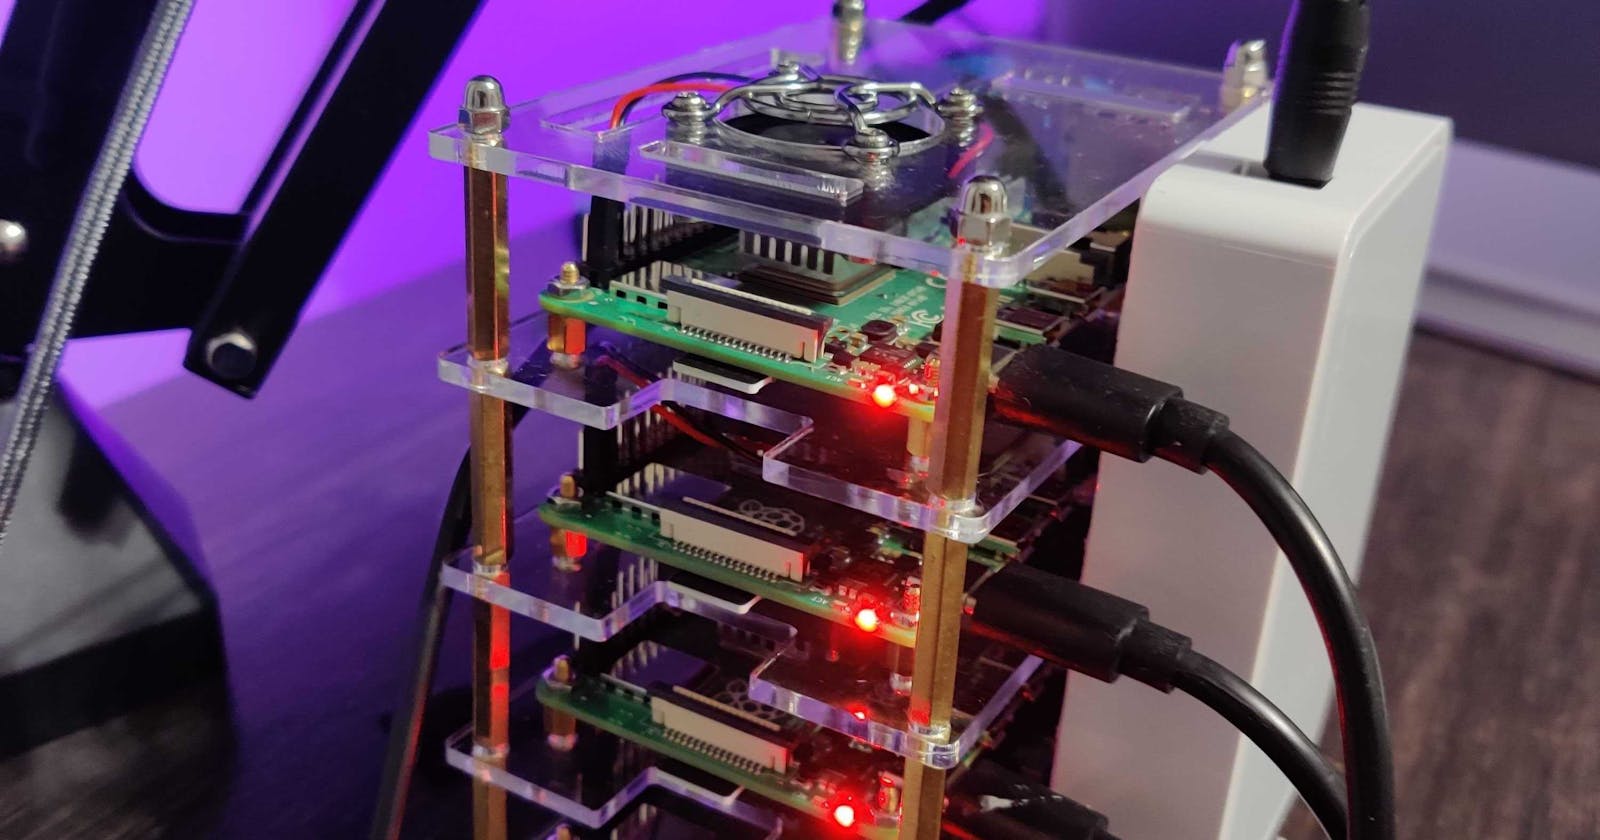 Building a Kubernetes cluster on Raspberry Pis with a little Azure